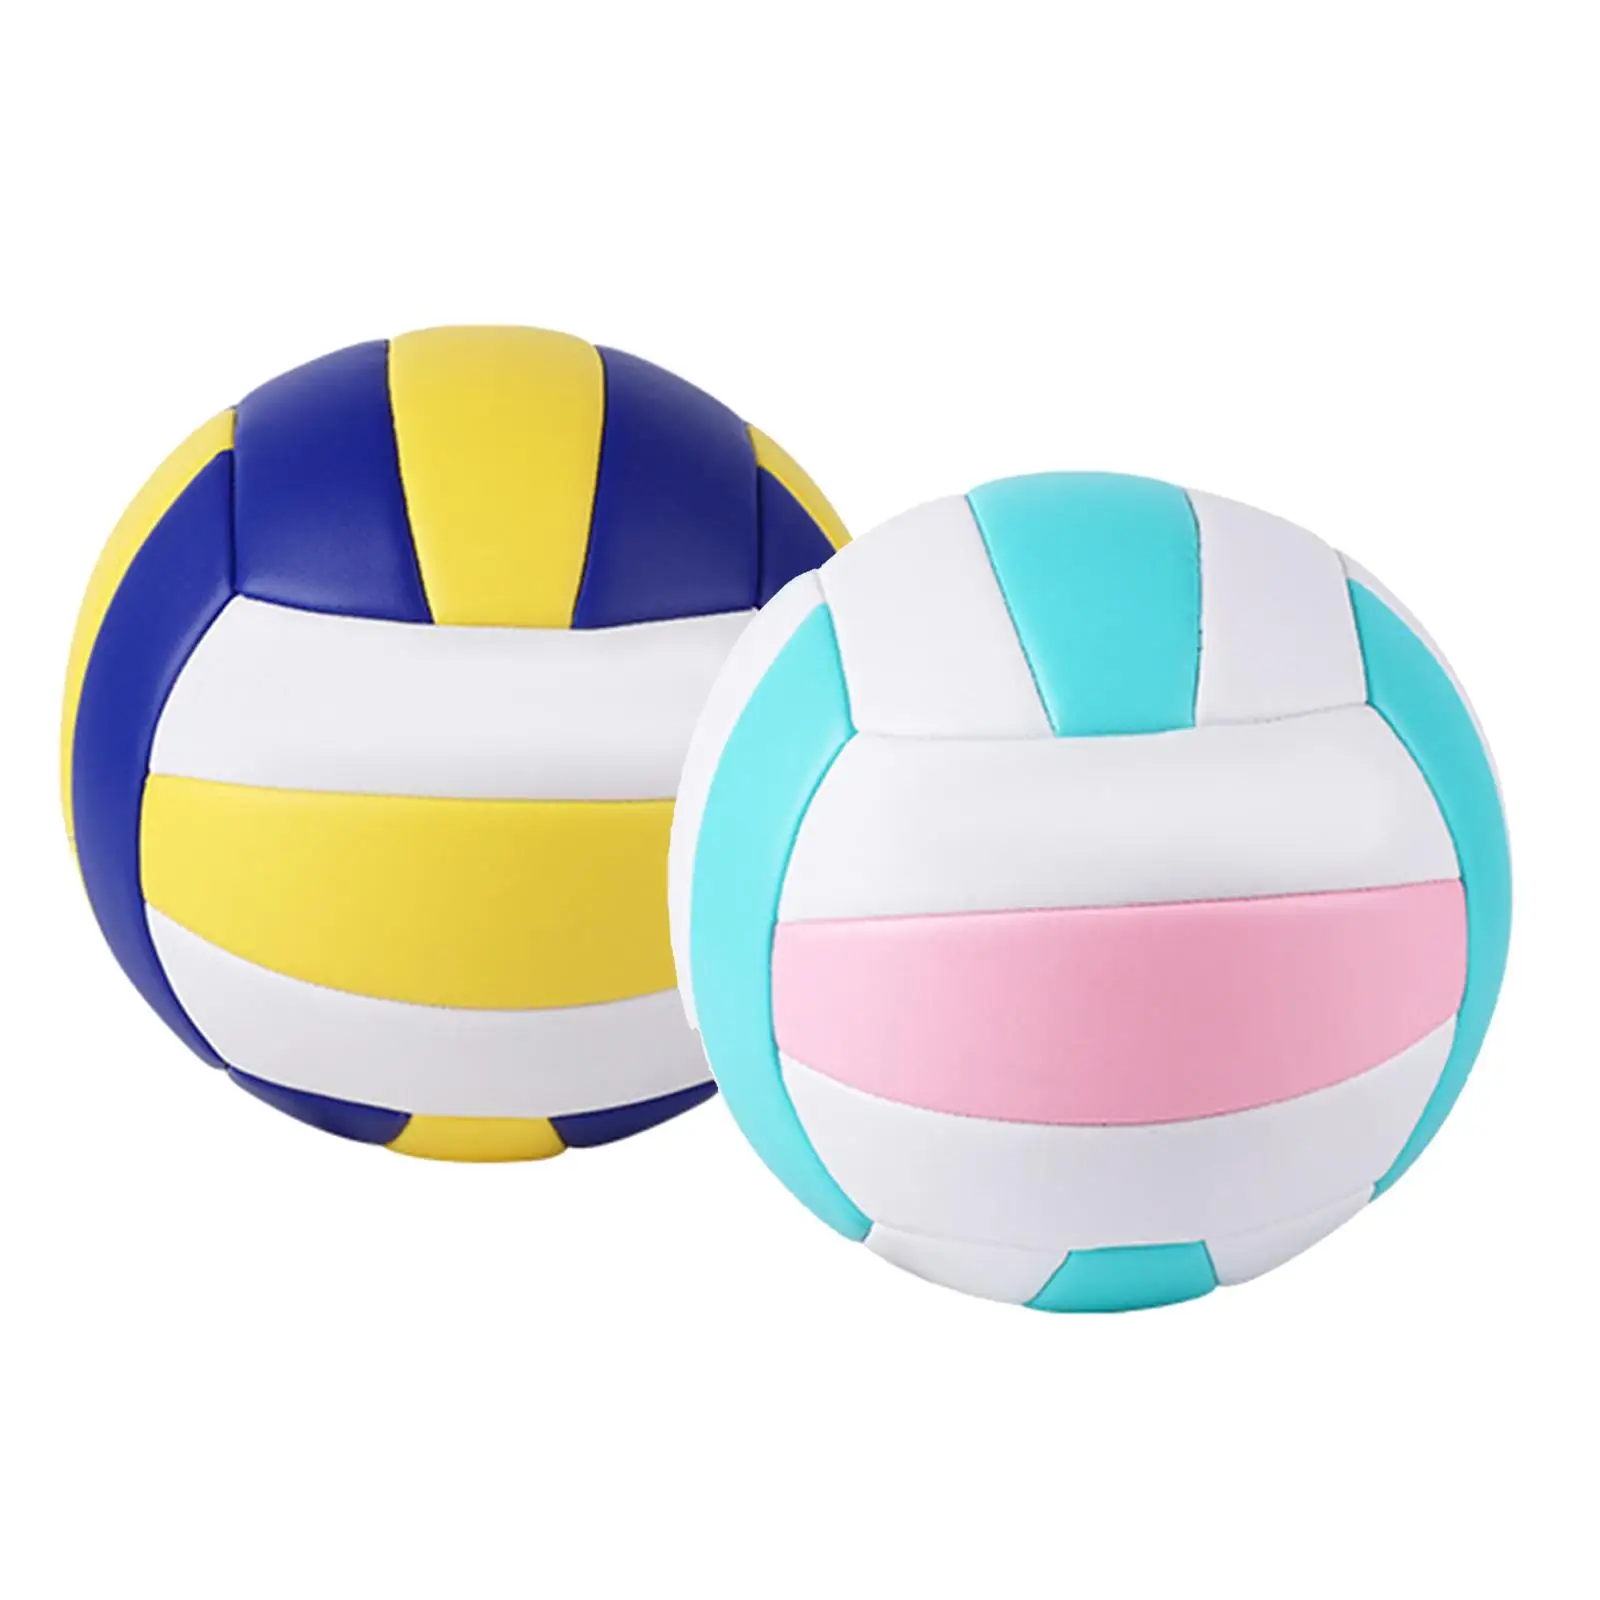 Size 5 Indoor Volleyball PU Leather Recreational Ball Beach Game Gym Beginner Adult